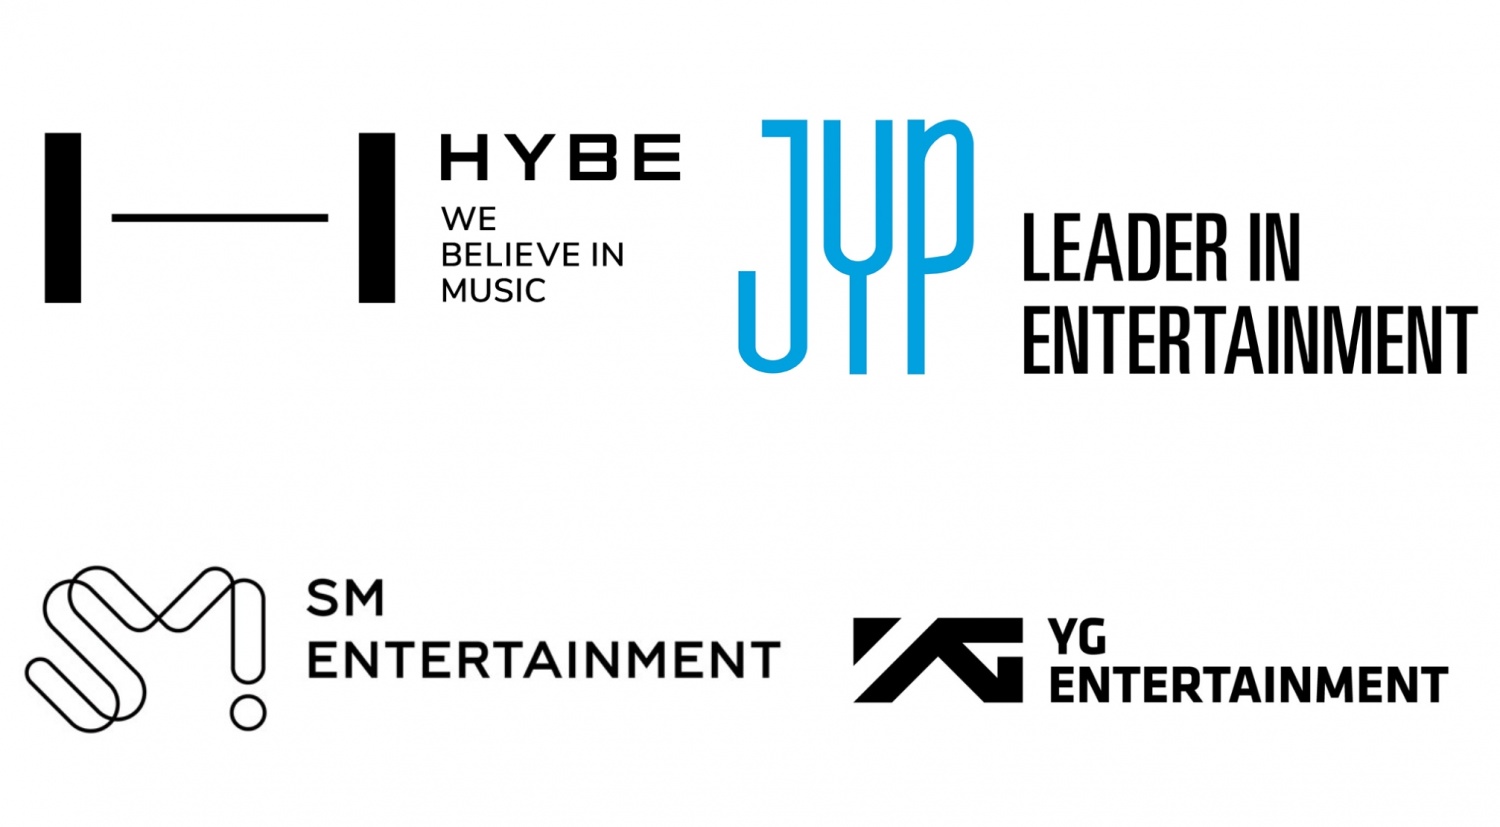 YG 'Pushed Down' from Top 3 Agencies With Largest Market Worth + HYBE